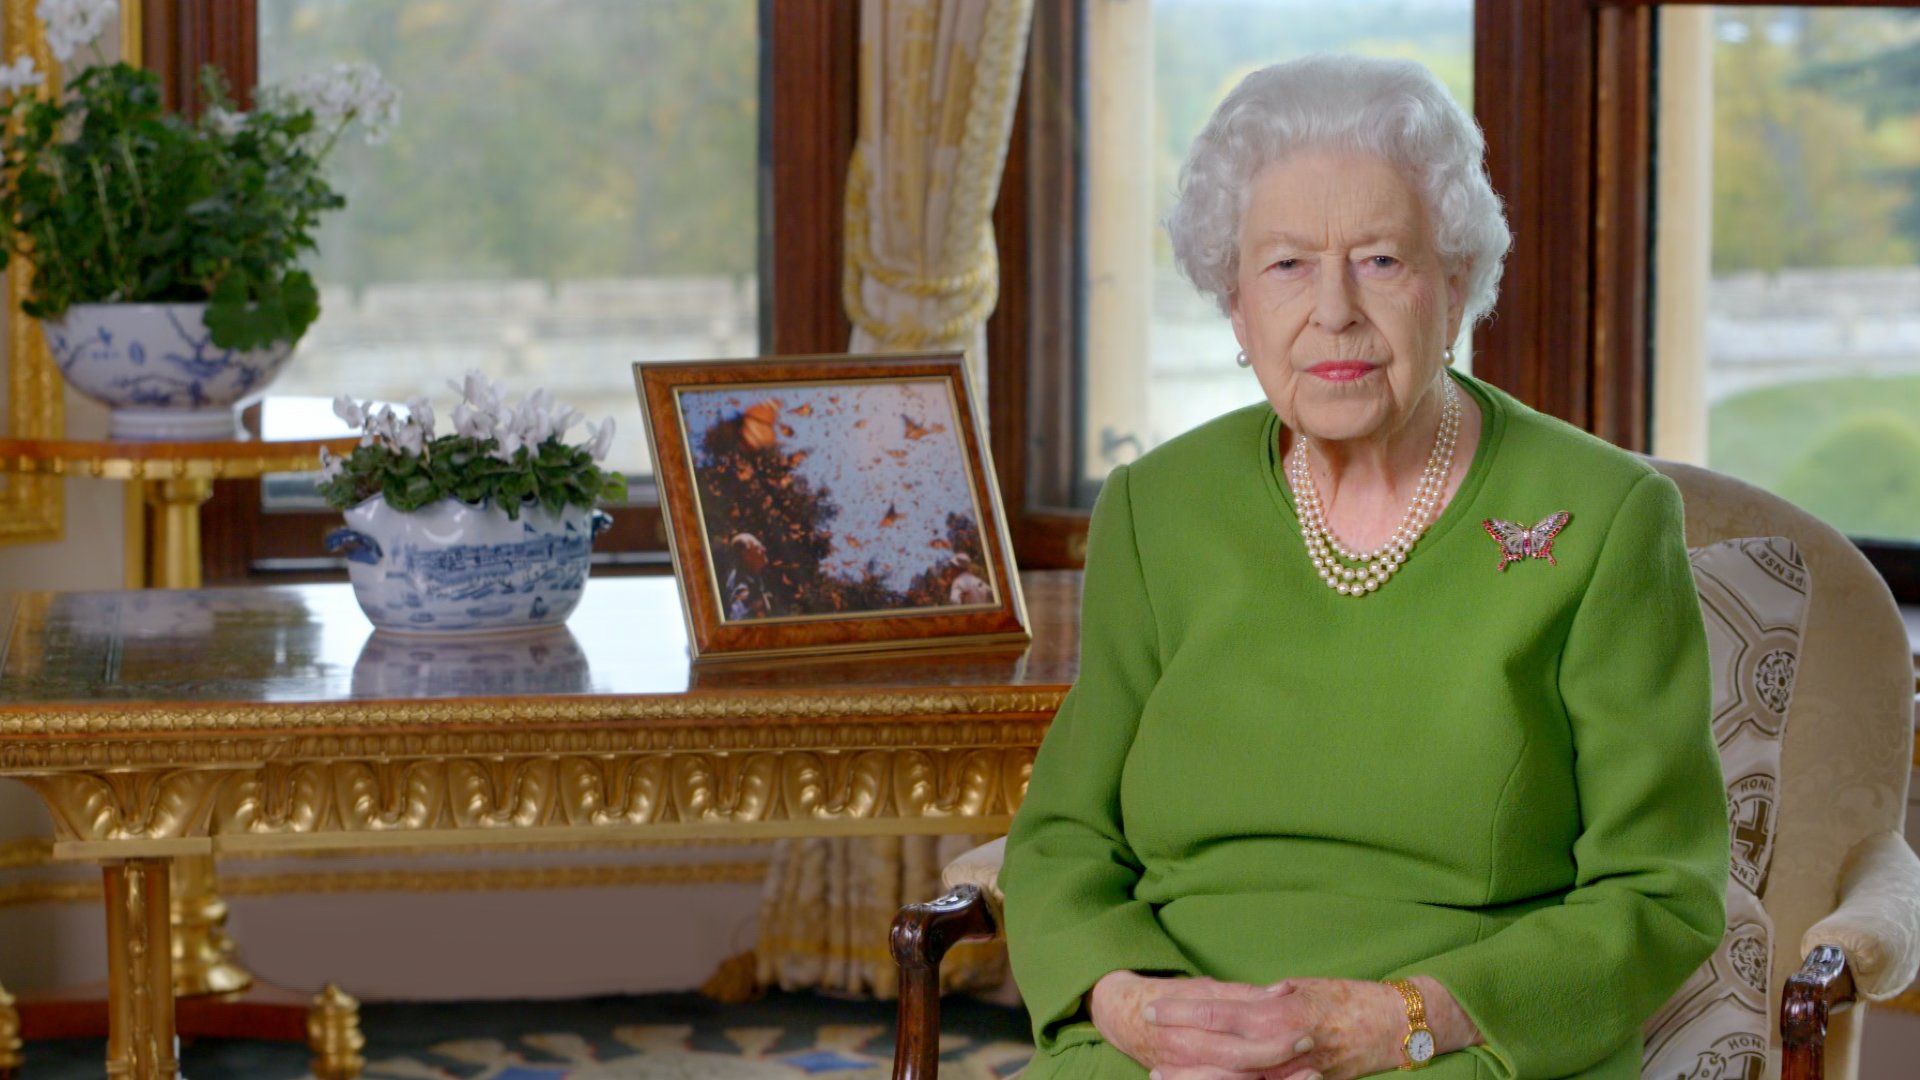 Queen Elizabeth II's Platinum Jubilee is being celebrated in 2022, here the monarch records a video message for COP26 summit in 2021